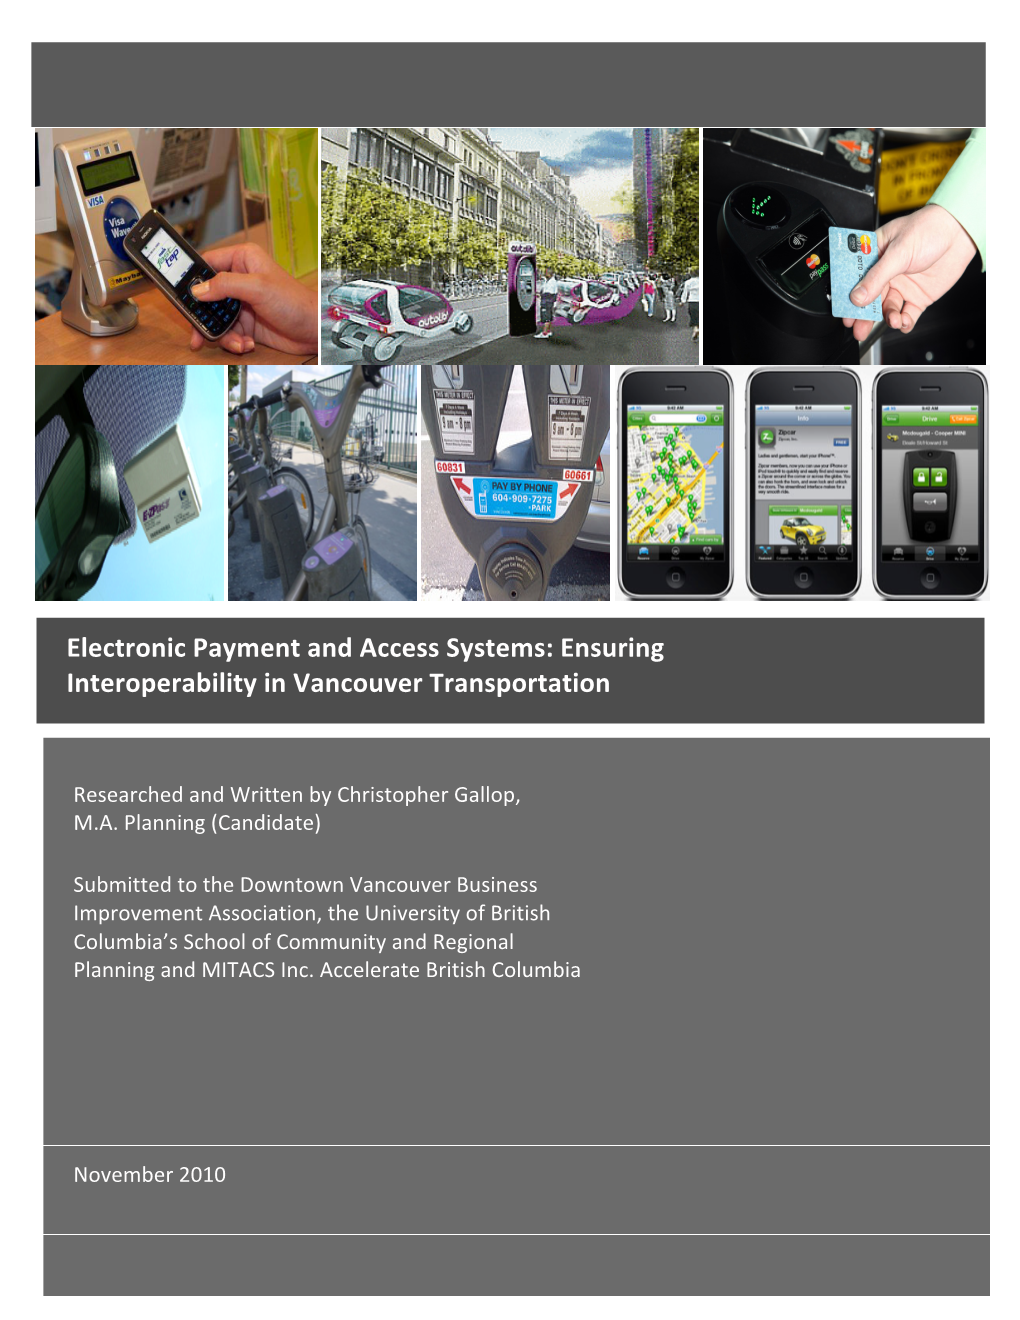 Electronic Payment and Access Systems: Ensuring Interoperability in Vancouver Transportation